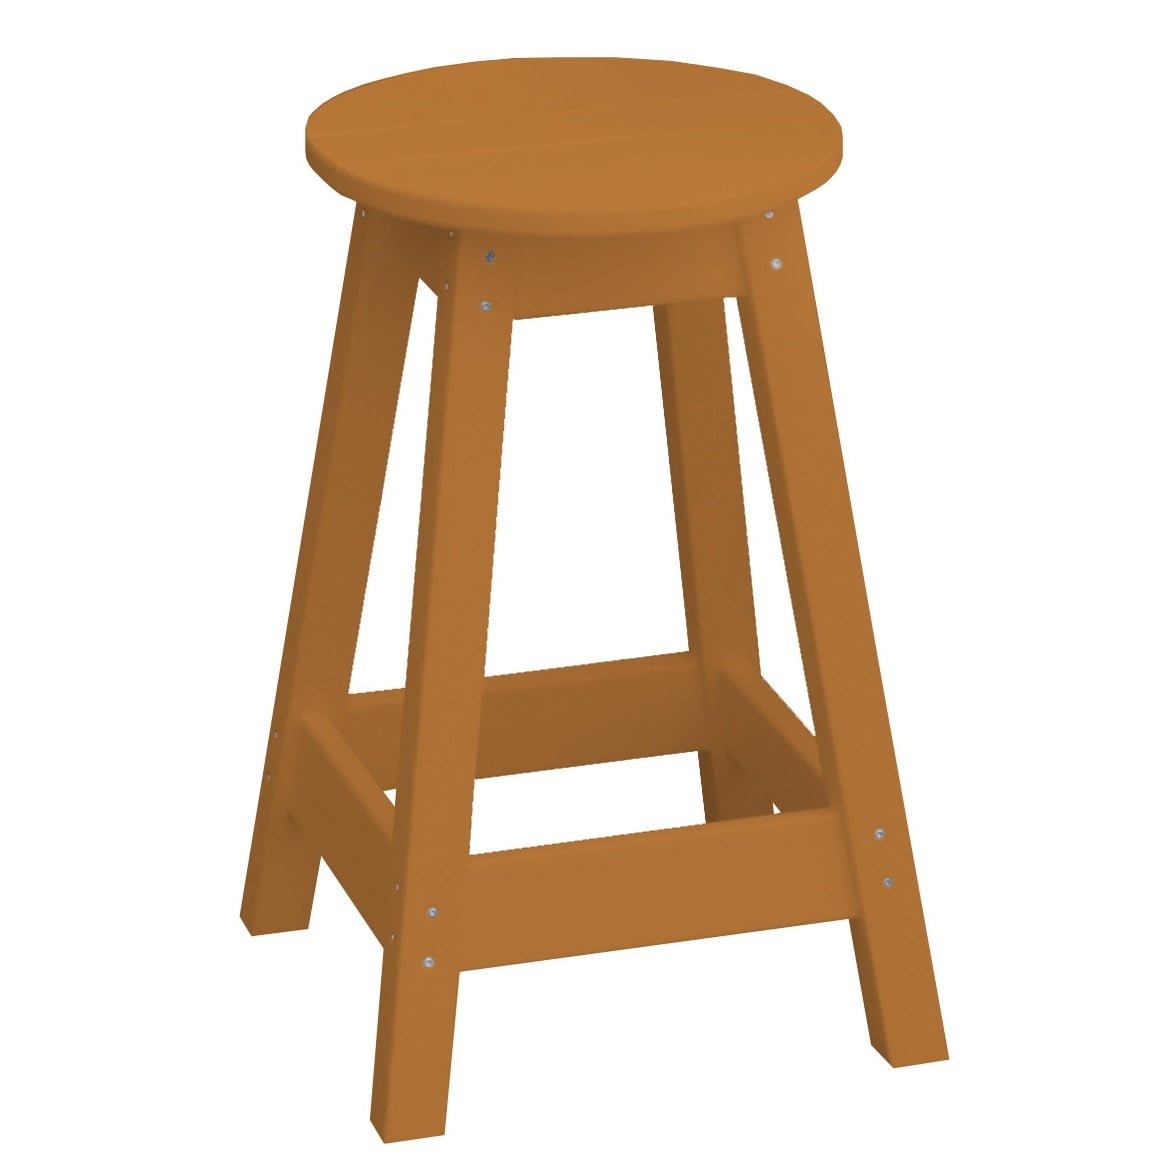 A&L Furniture Poly Lumber Round Bistro Stool